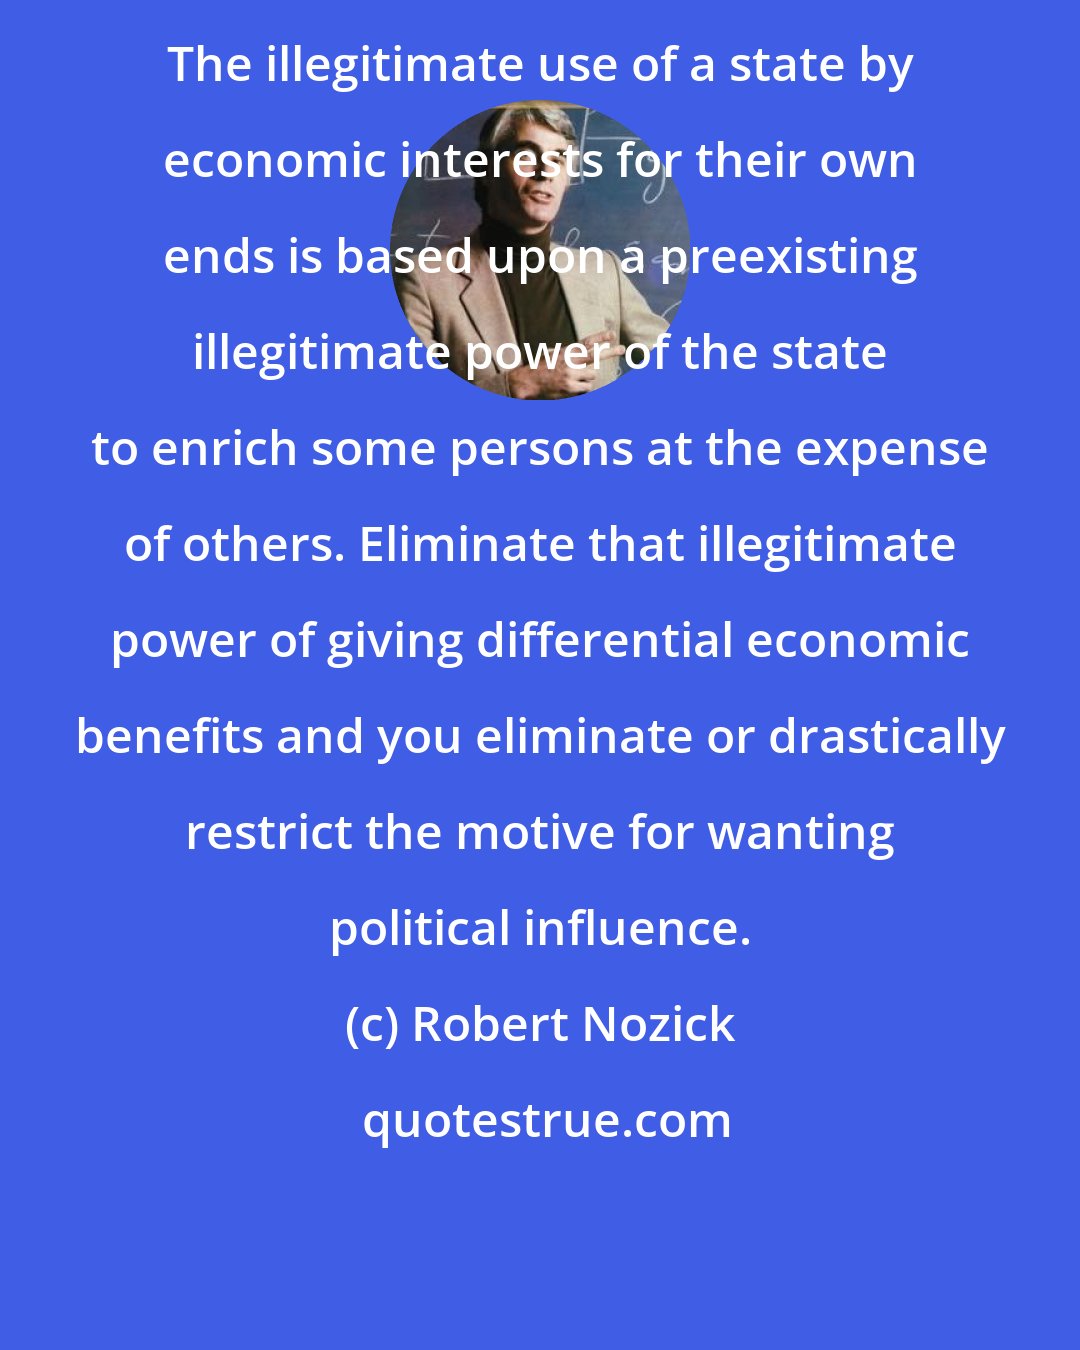 Robert Nozick: The illegitimate use of a state by economic interests for their own ends is based upon a preexisting illegitimate power of the state to enrich some persons at the expense of others. Eliminate that illegitimate power of giving differential economic benefits and you eliminate or drastically restrict the motive for wanting political influence.